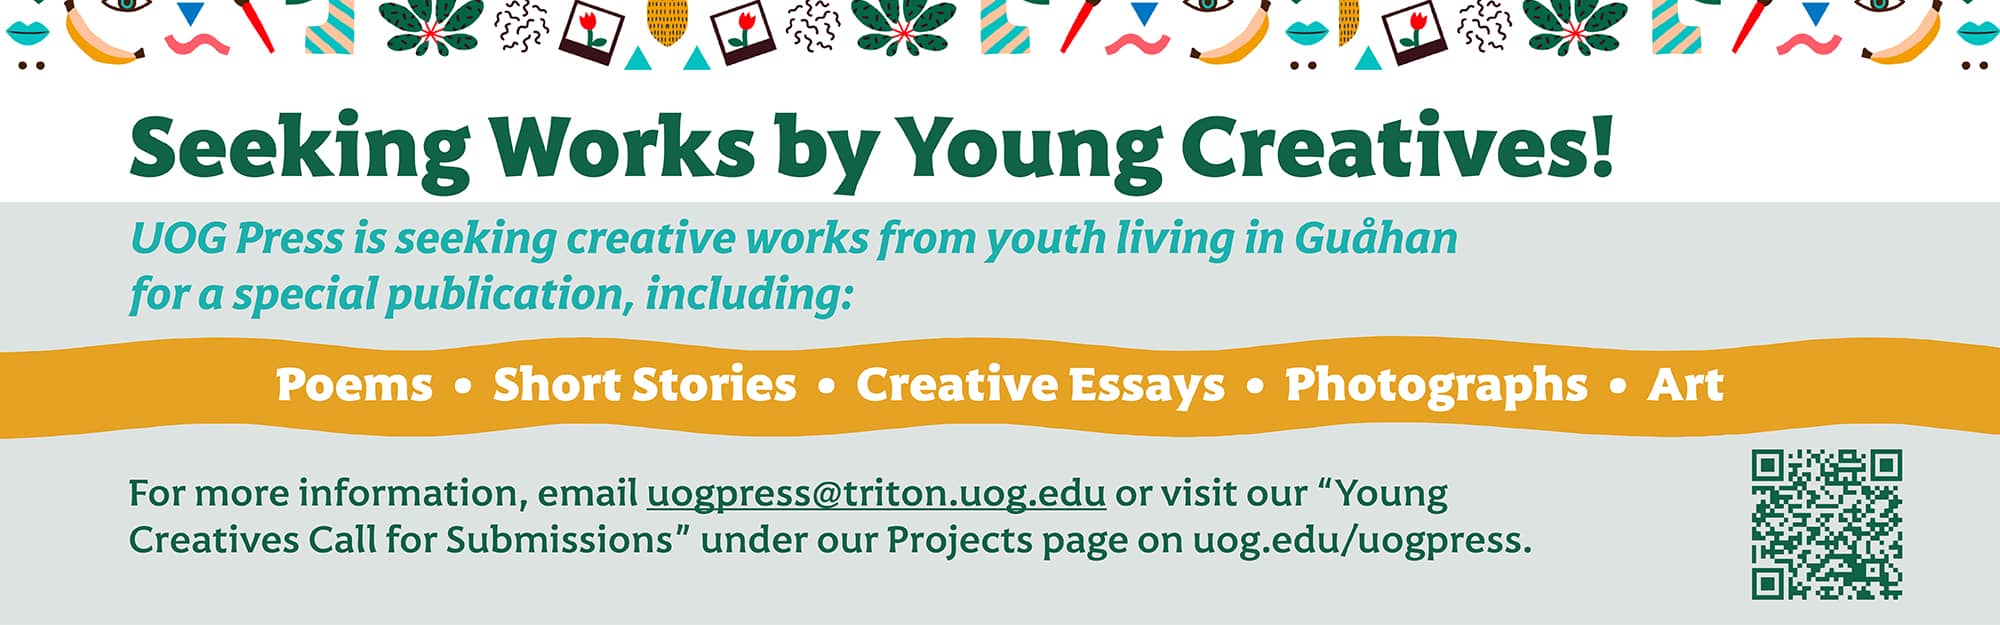 UOG Press is seeking works by young creatives. Please click here for more information